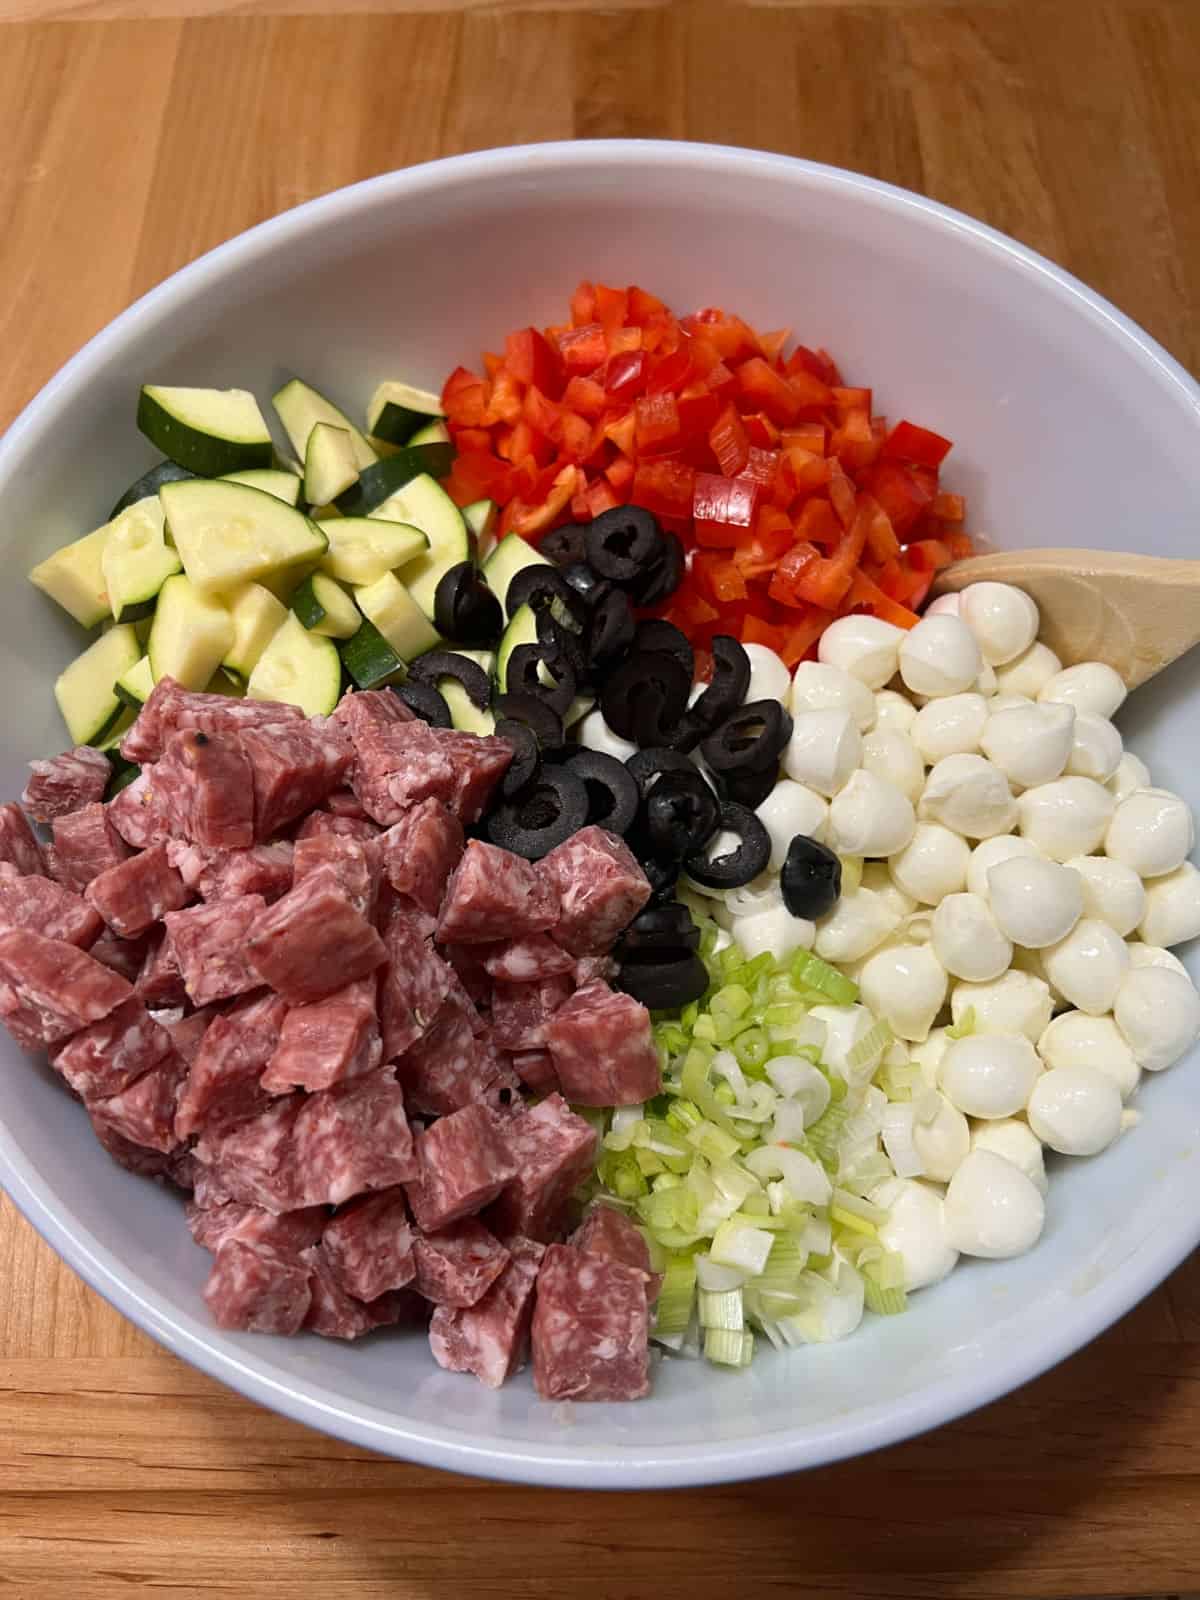 All ingredients added to bowl with pasta and dressing: salami, zucchini, bell pepper, olives, cheese, and green onions.